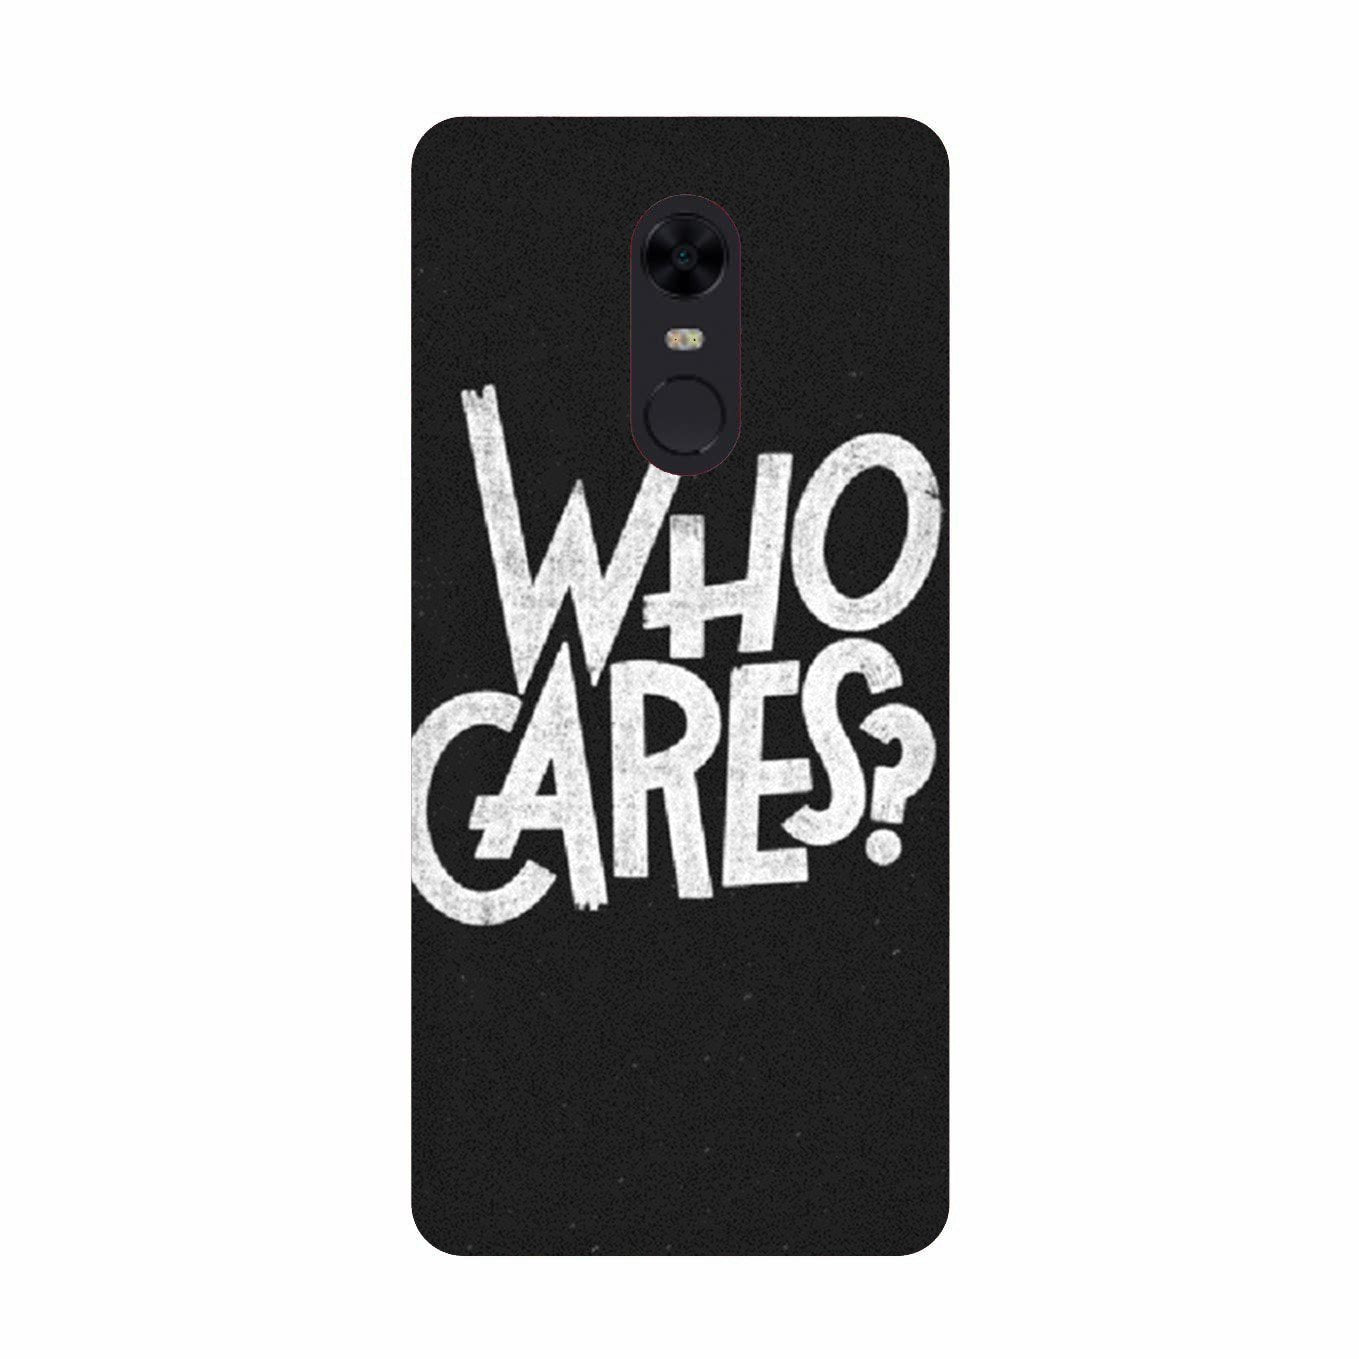 Who Cares Case for Redmi Note 5